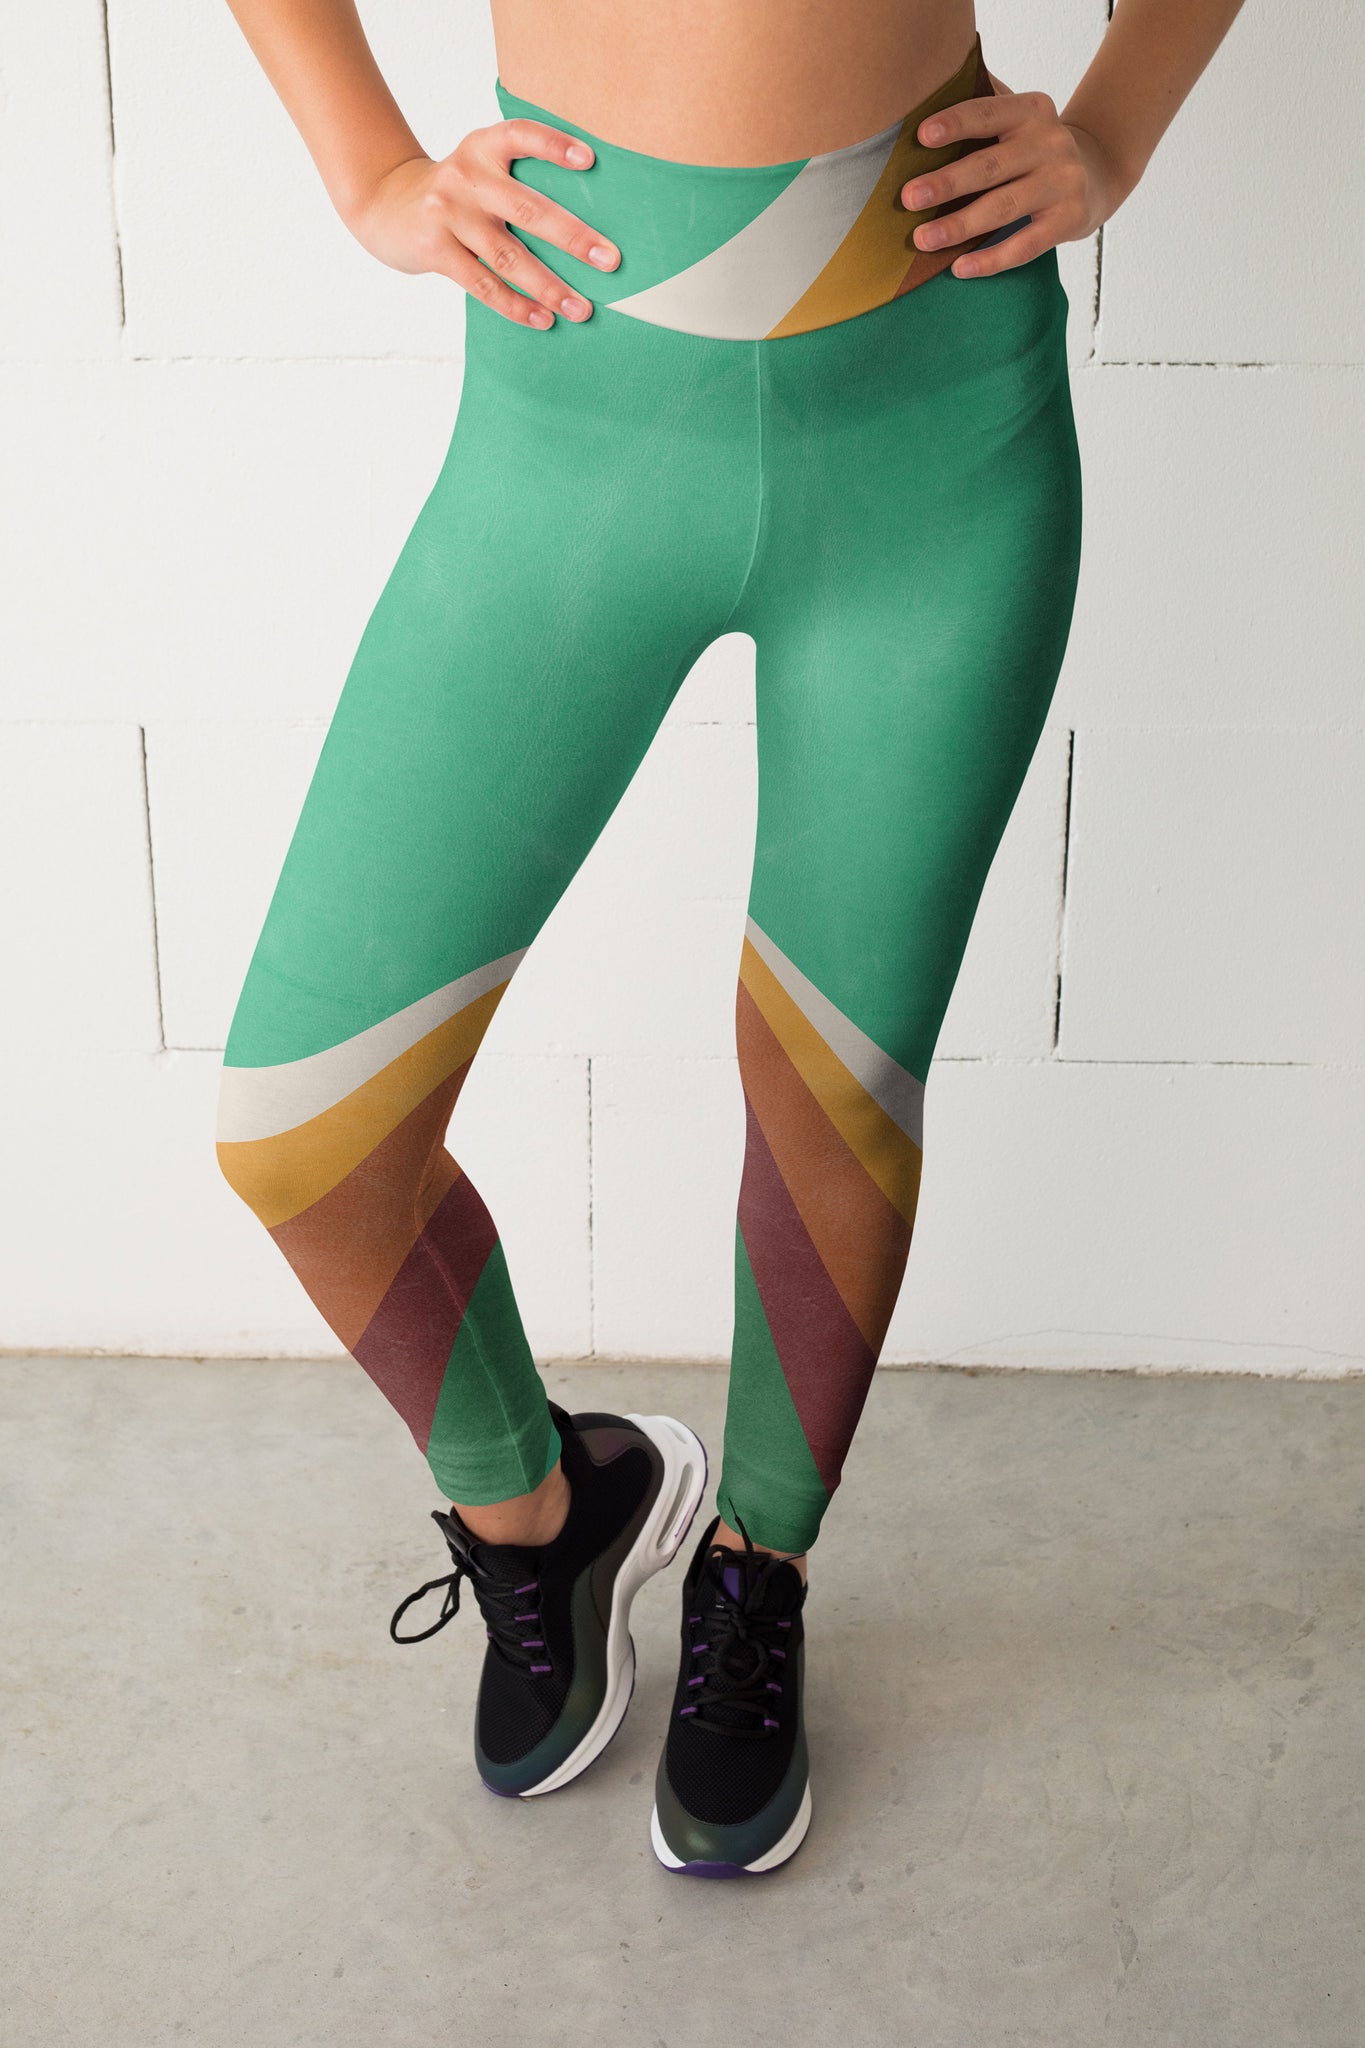 color block leggings in retro shades of green and brow